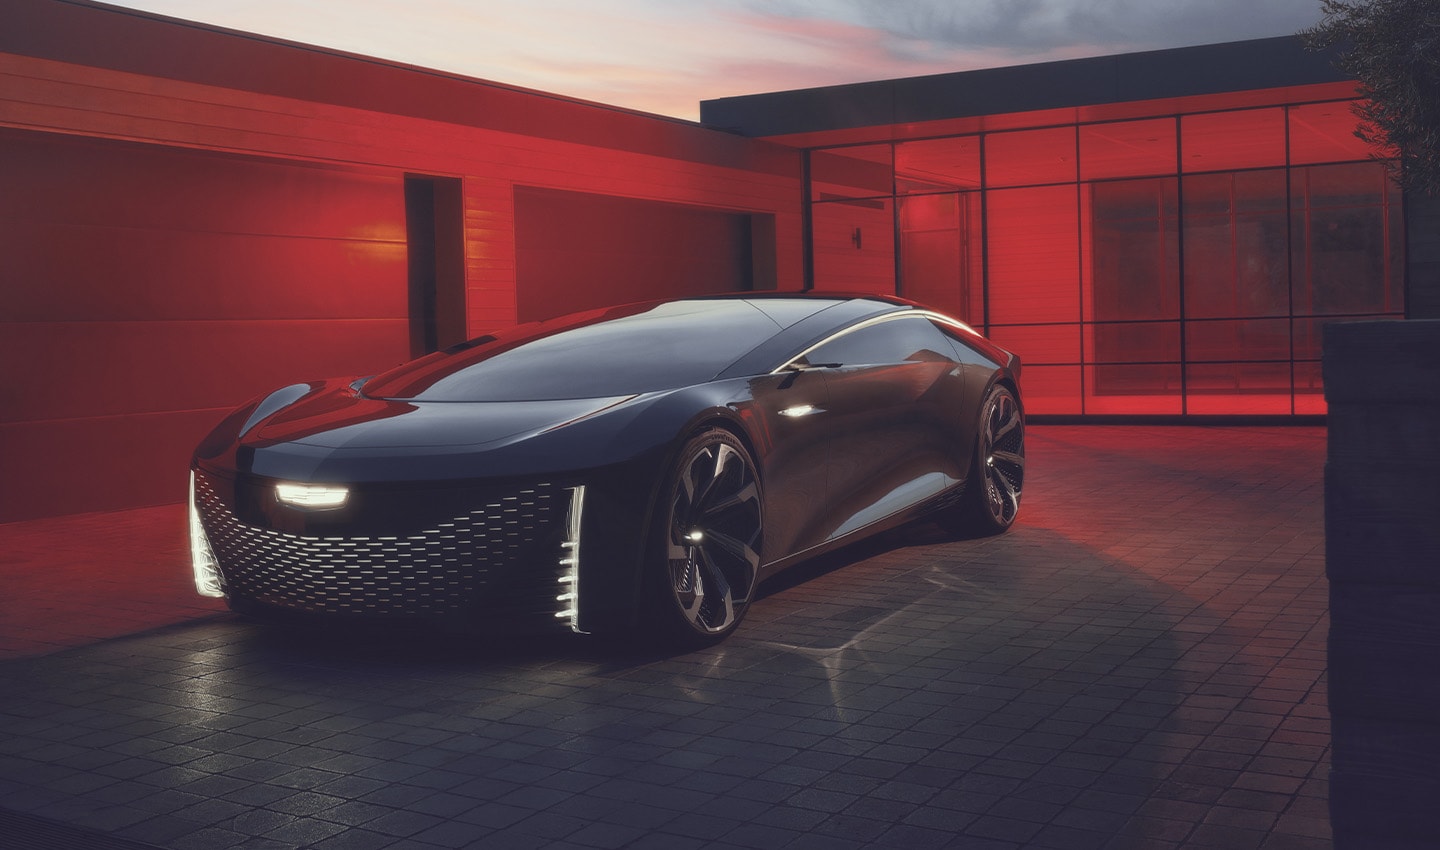 Cadillac’s InnerSpace Autonomous Concept gives a hint as to what we can expect from the brand over the next decade.